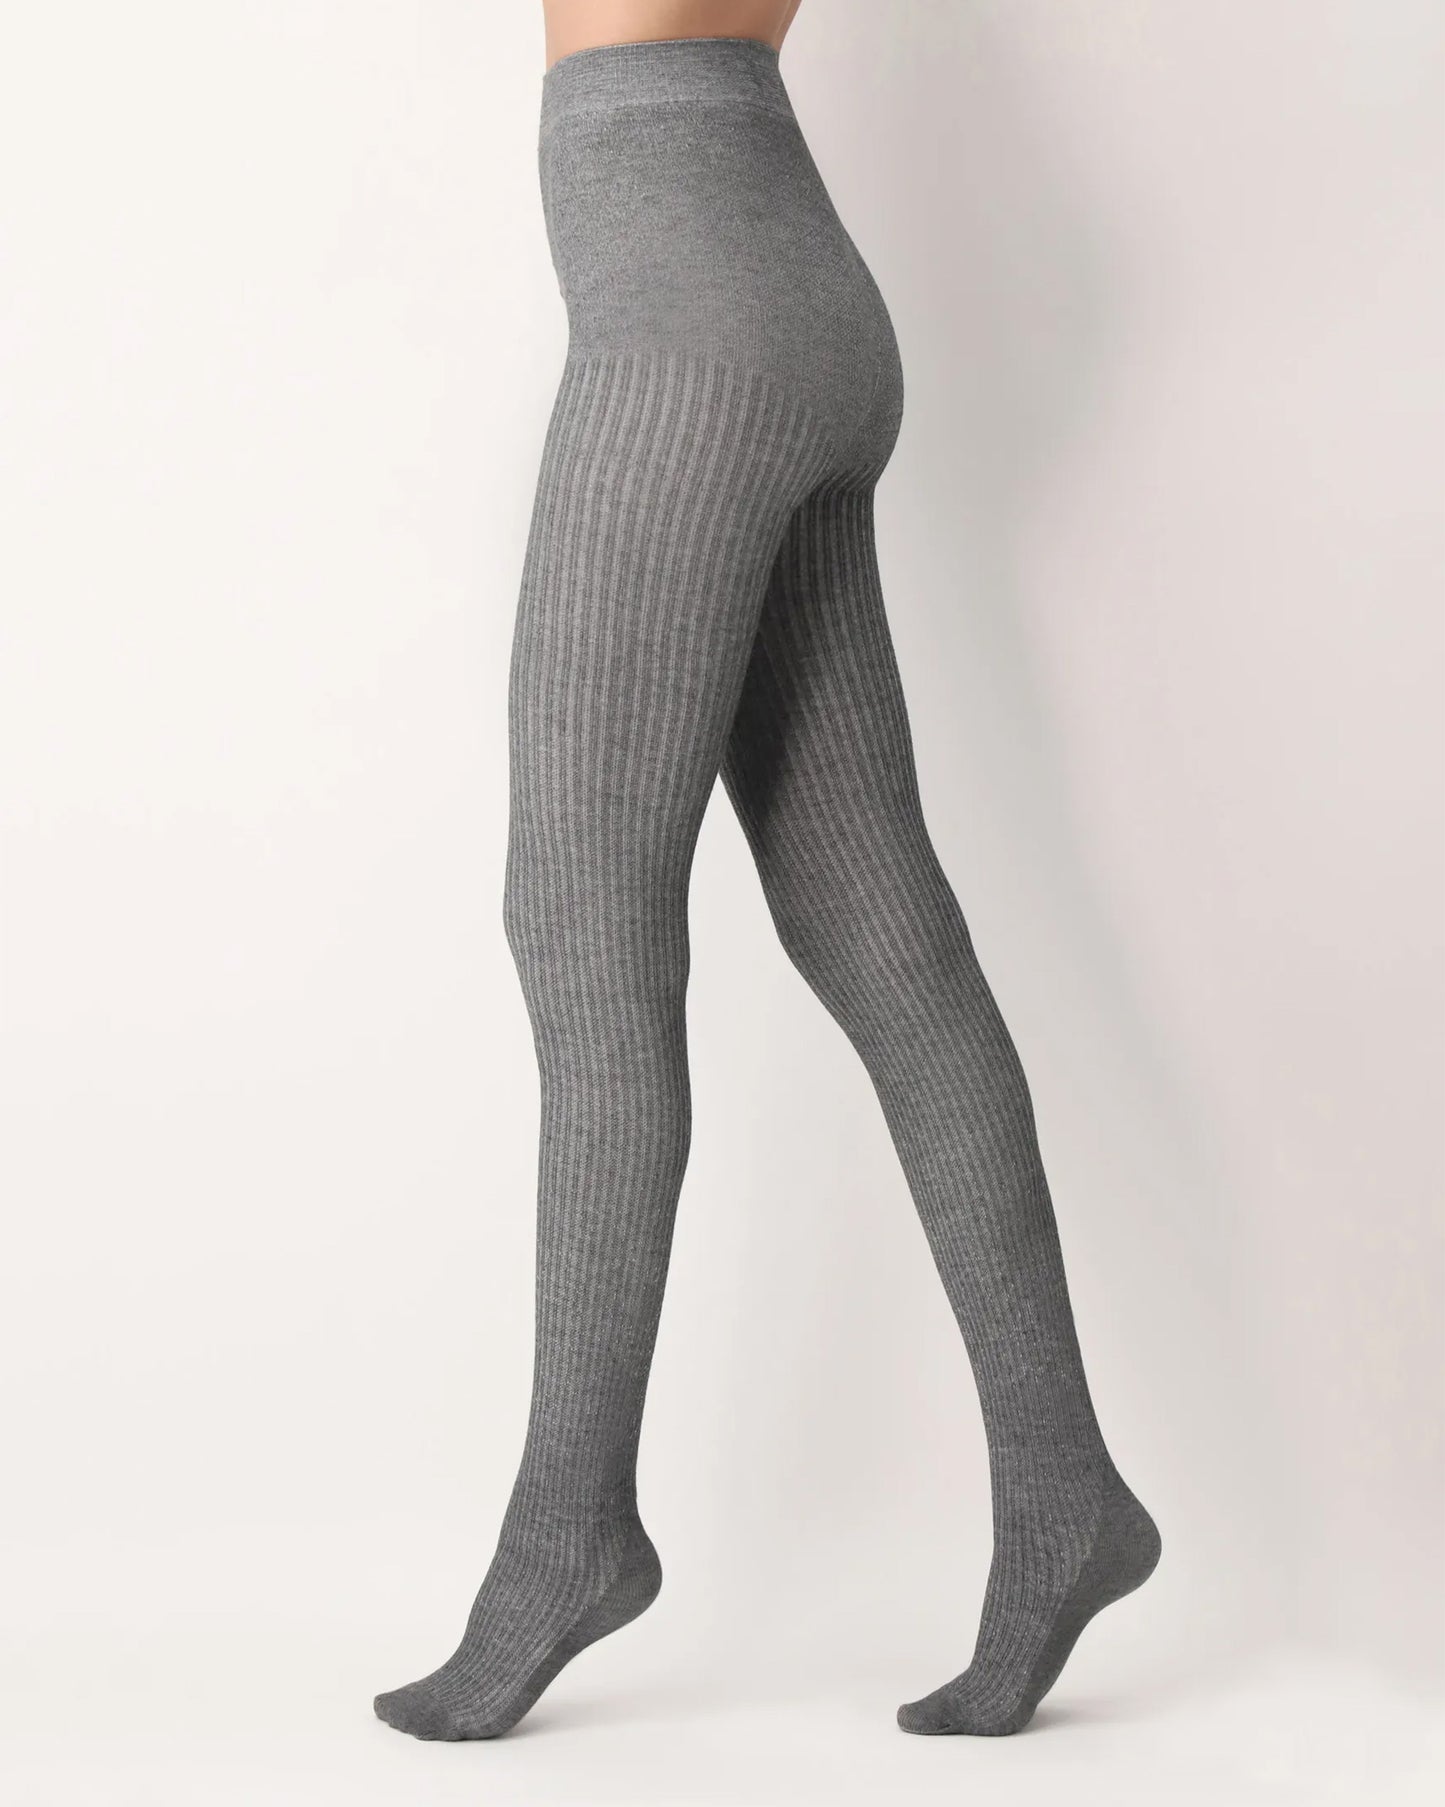 Oroblu Eco Natural Rib Tights - Light fleck grey ribbed knitted tights made of soft recycled polyester and viscose with built in shoe liner socks.